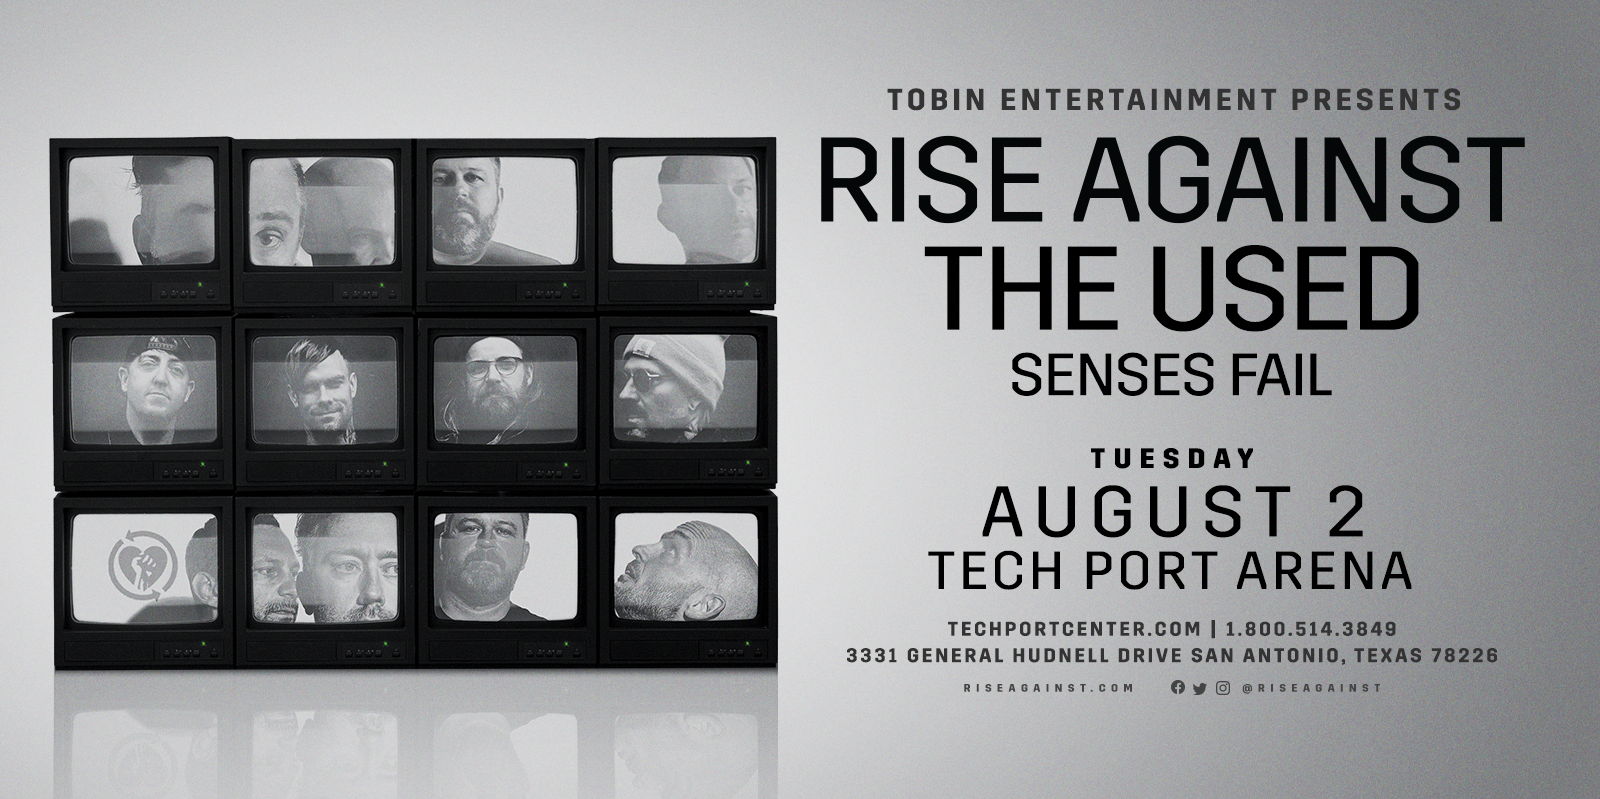 Rise Against & The Used promotional image